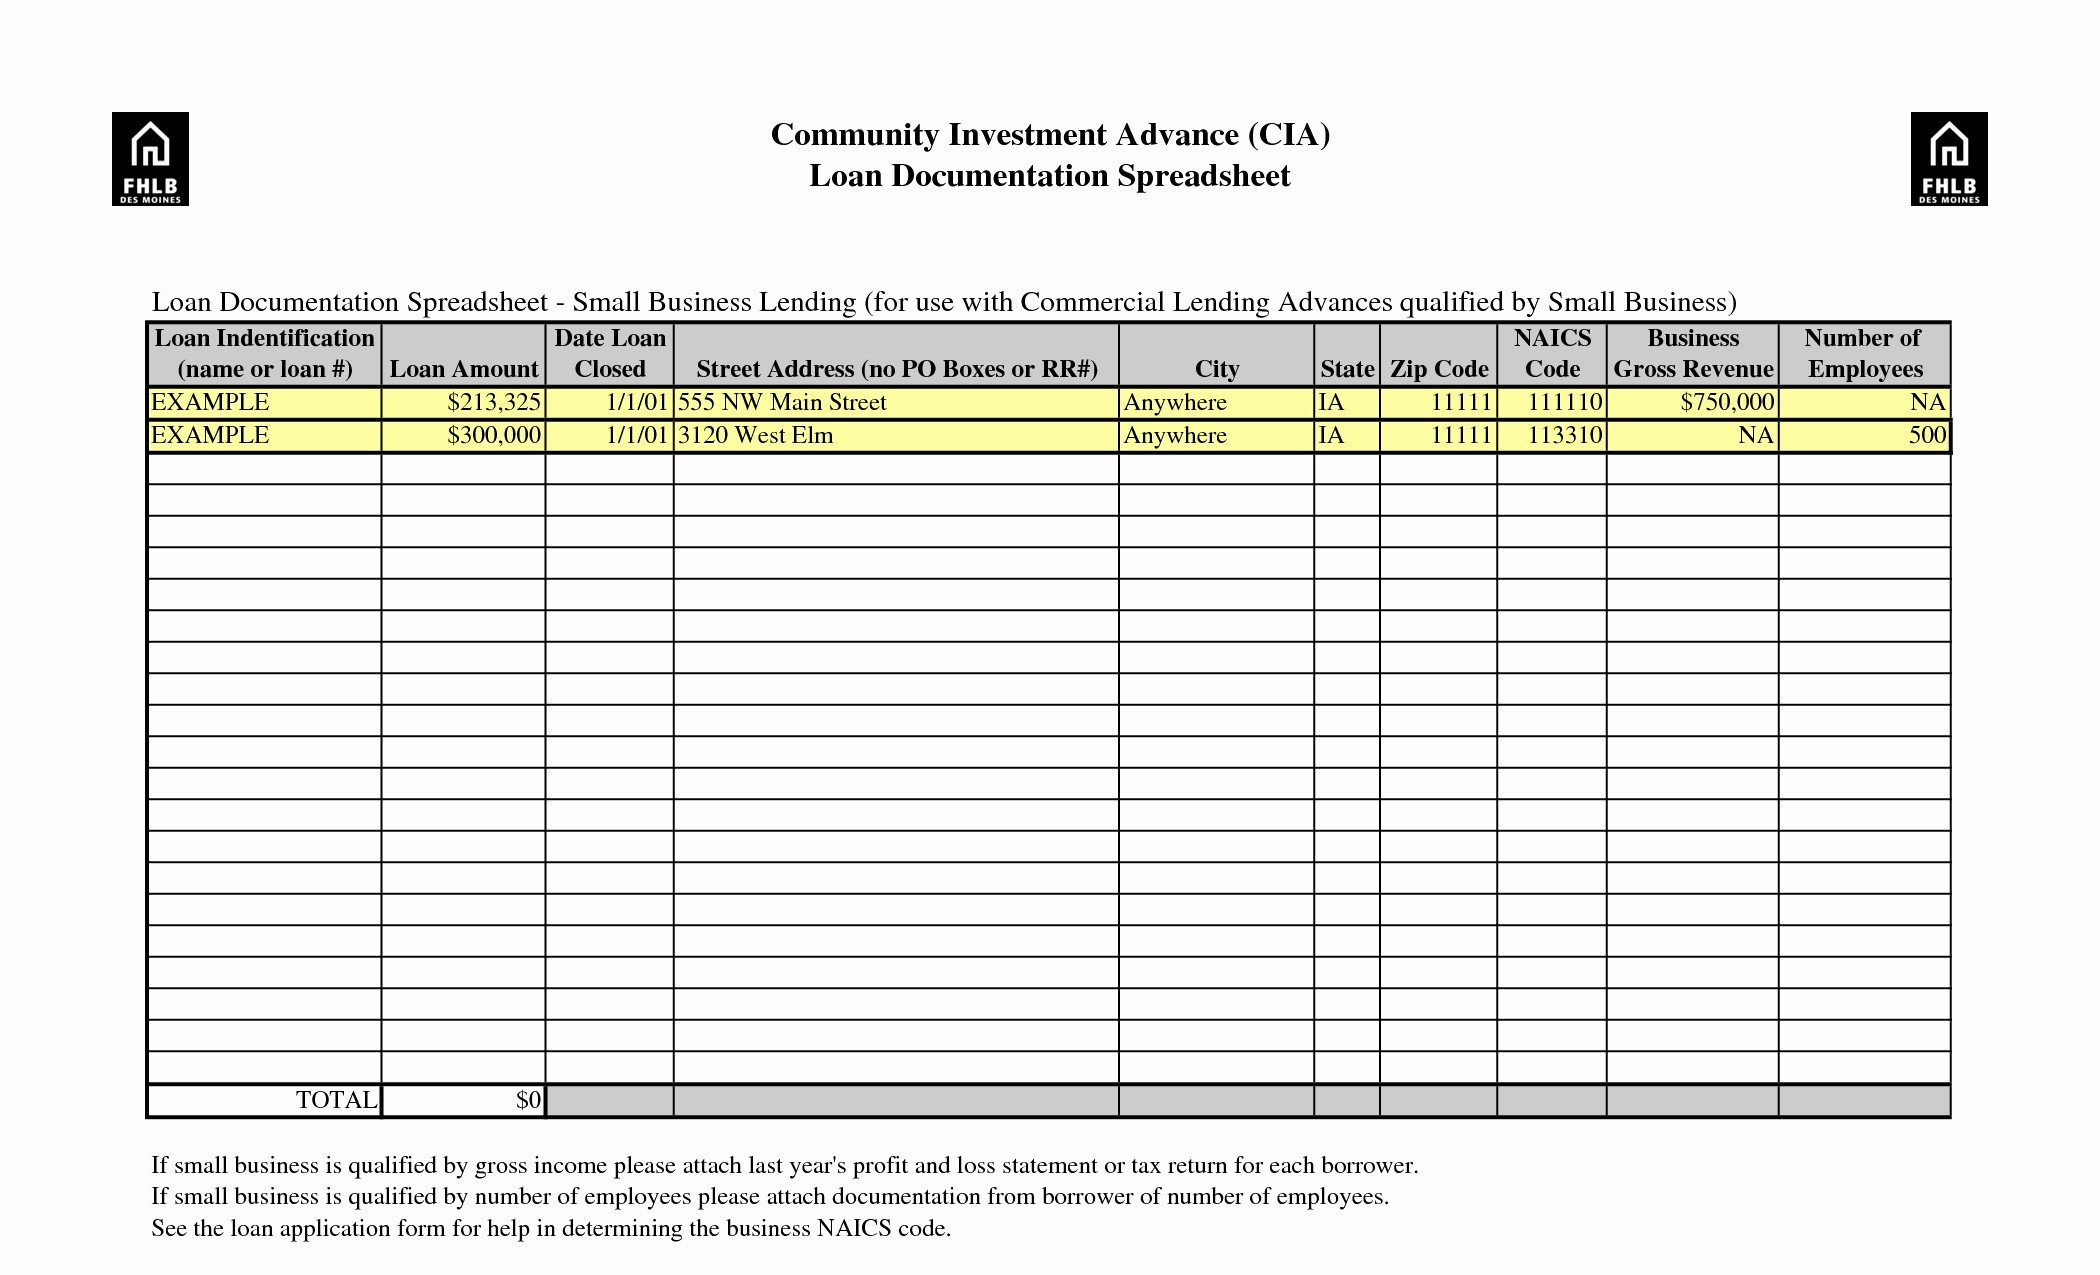 Goodwill Donation Excel Spreadsheet Spreadsheet Template Page 266 Monthly Financial Planning